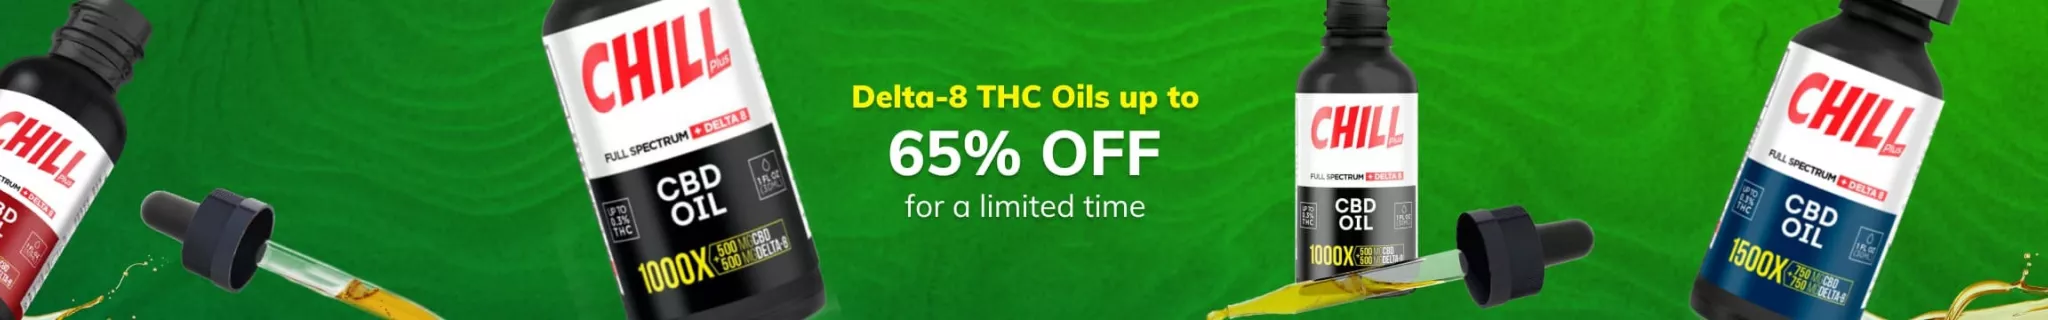 Delta-8 THC banners 65% OFF